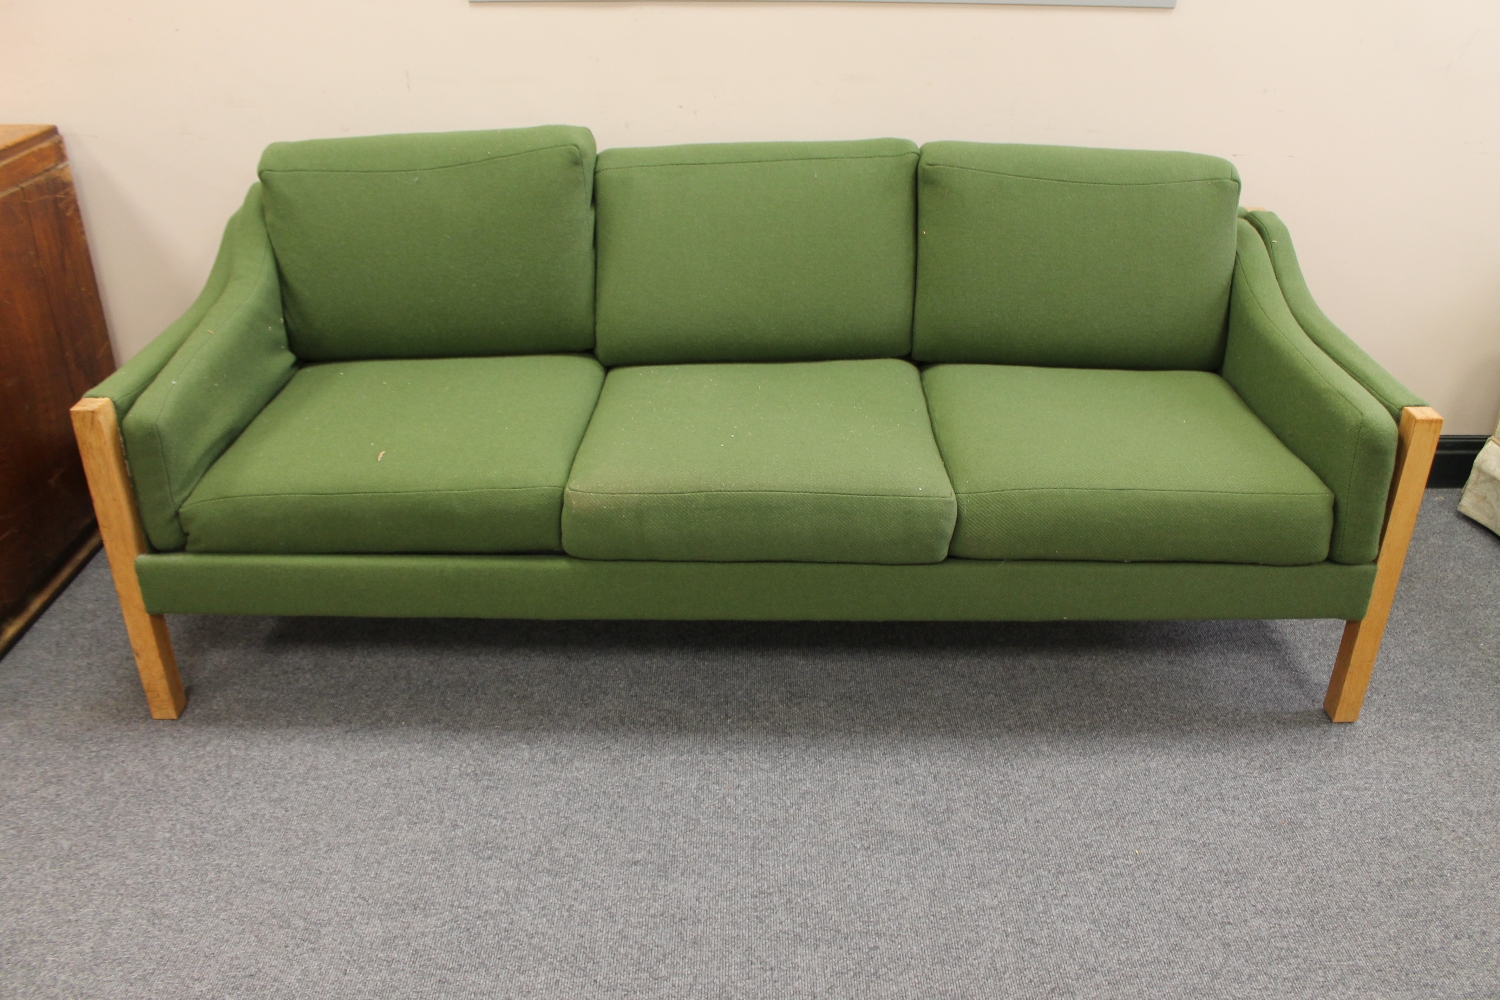 A twentieth century blond oak framed three seater settee upholstered in green fabric